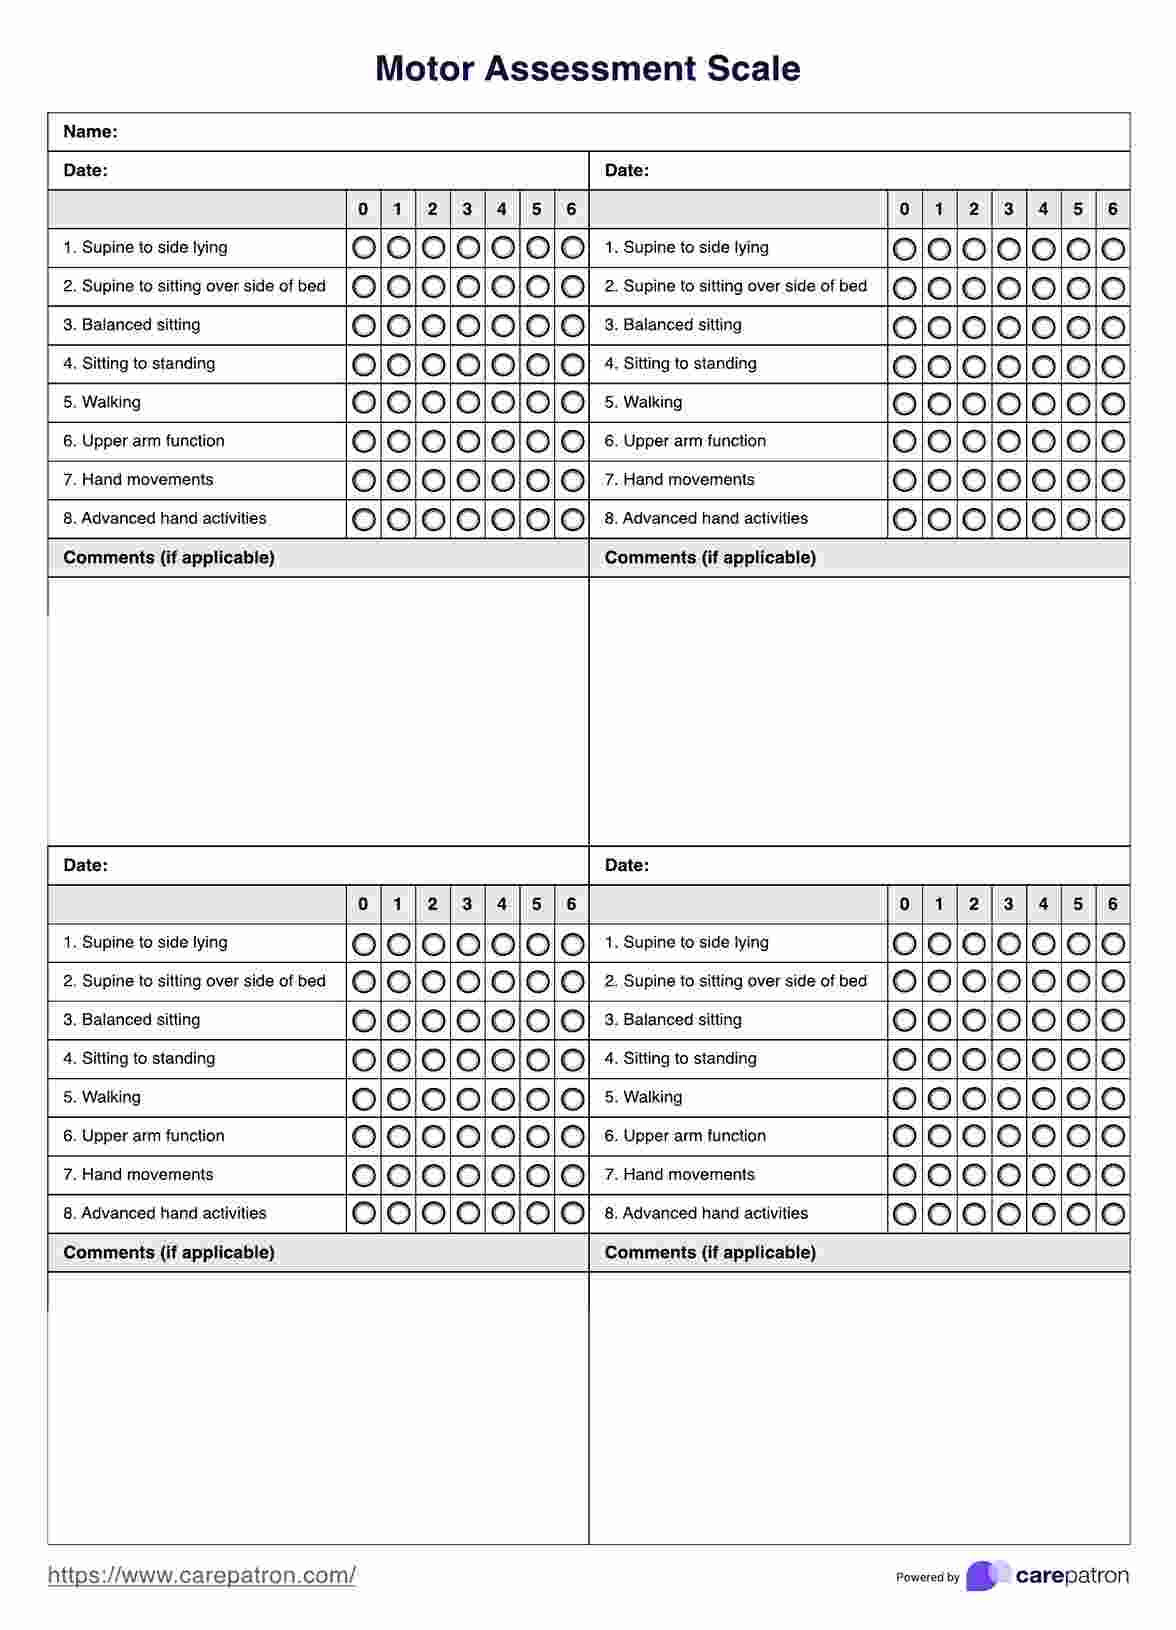 Motor Assessment Scale PDF Example